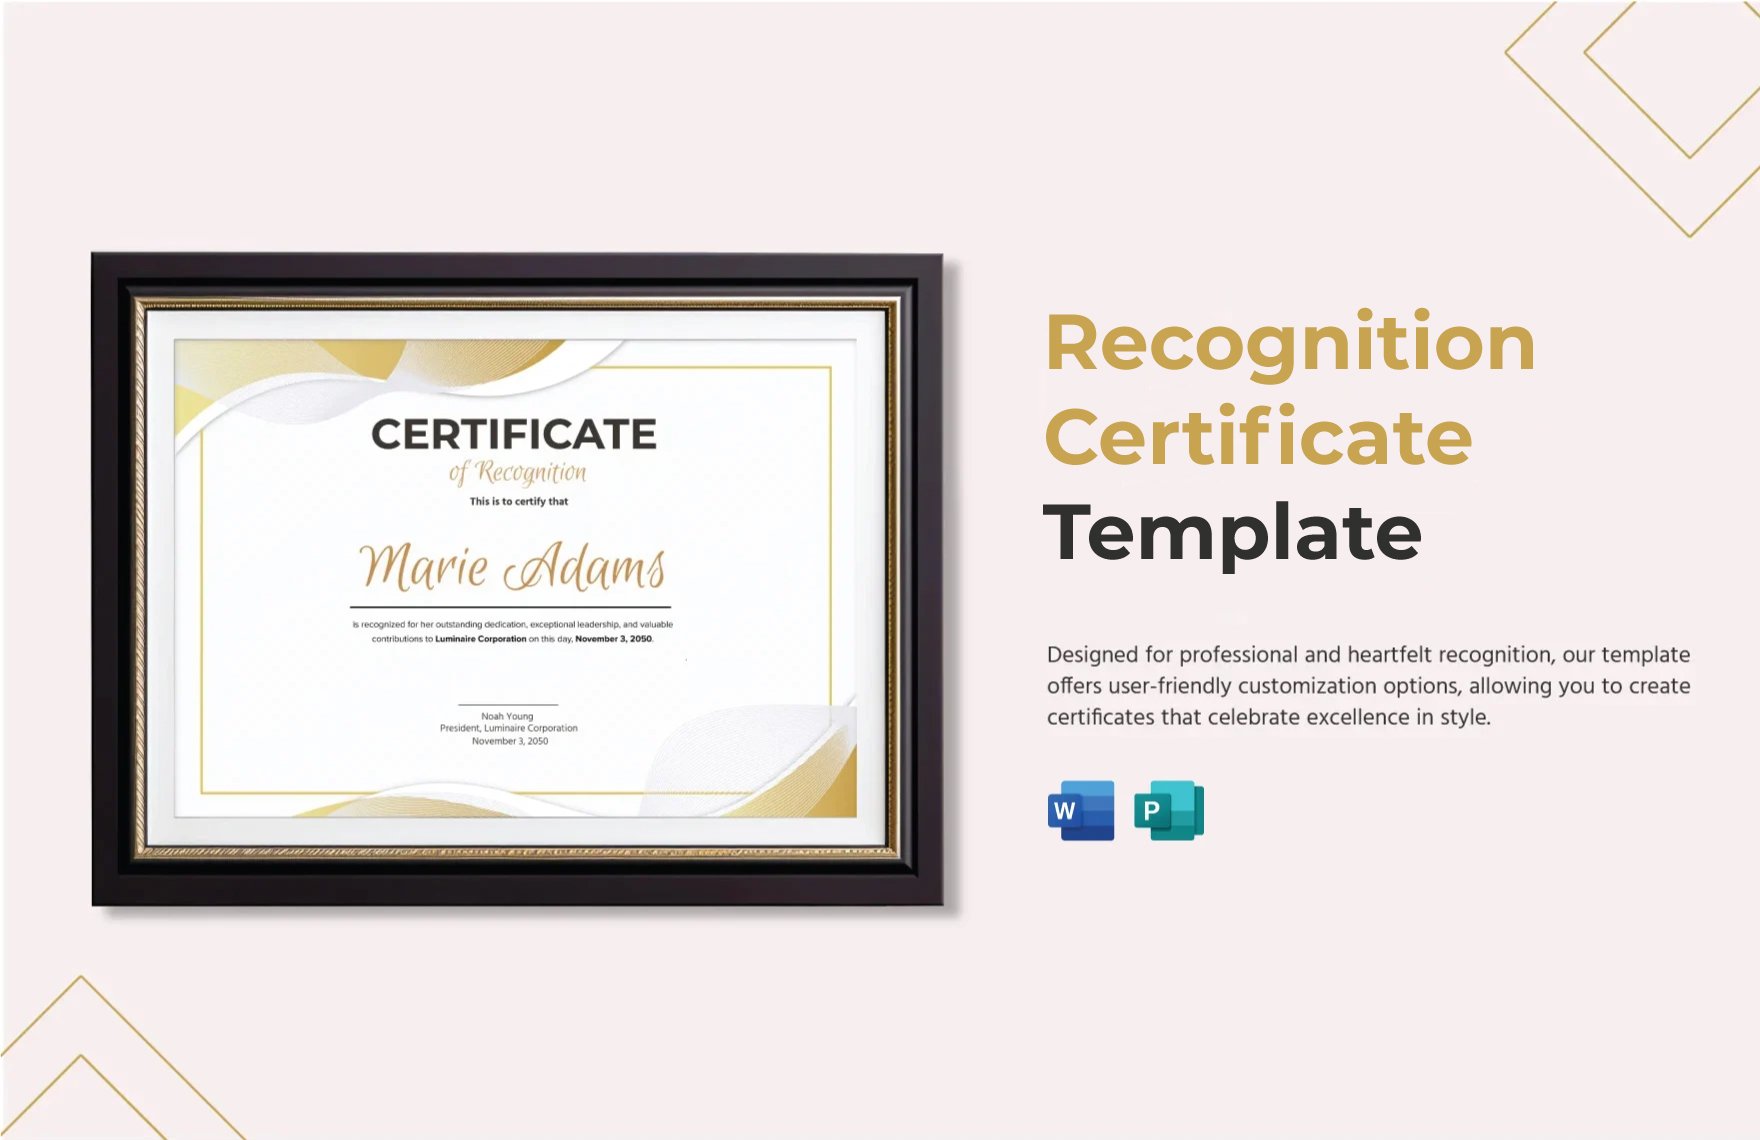 Free Recognition Certificate Template